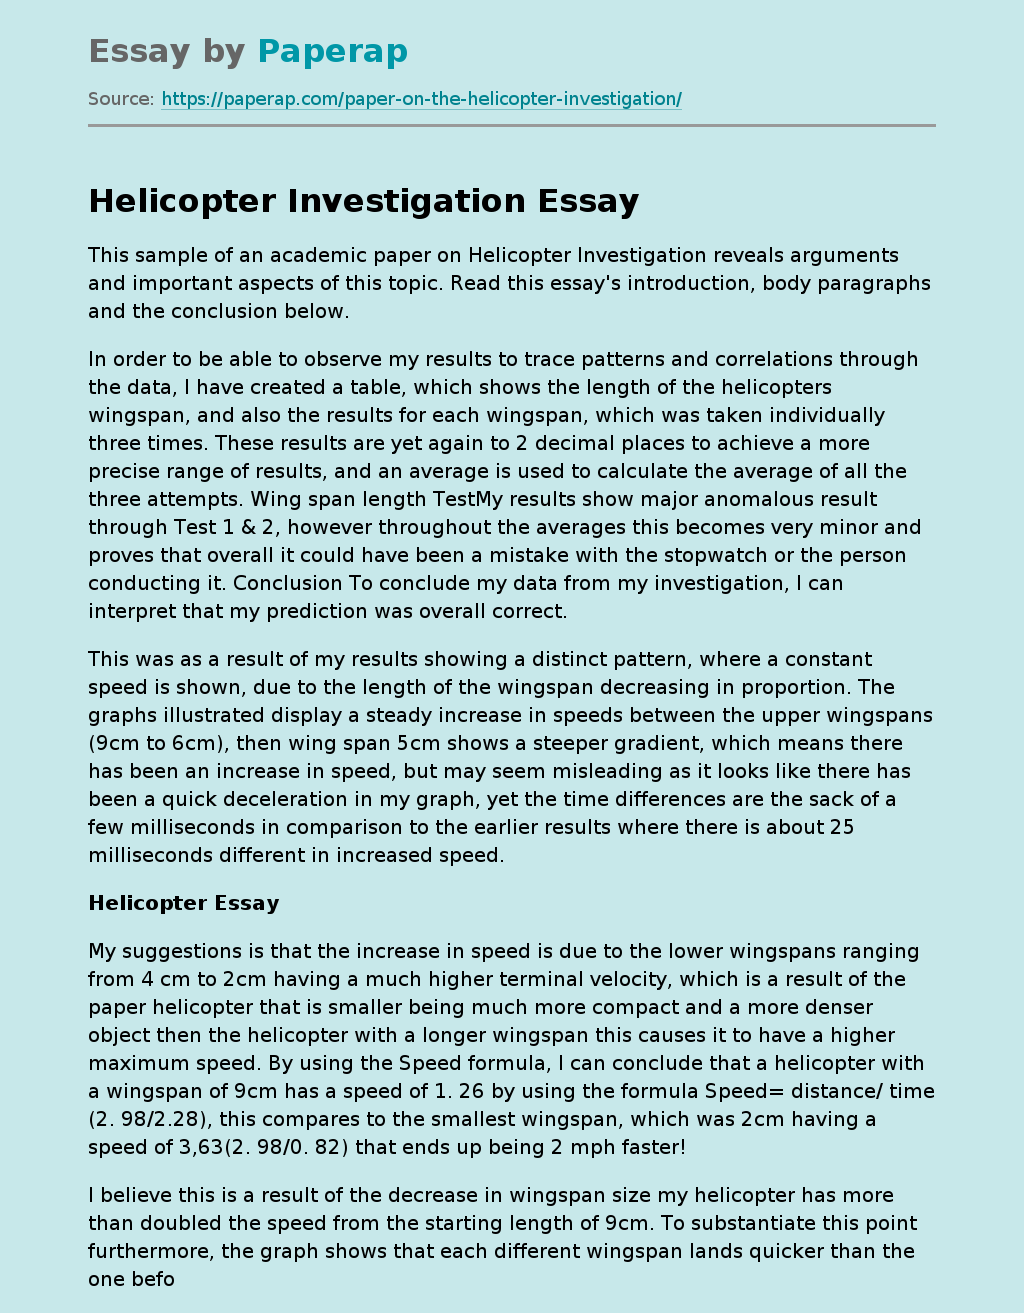 Helicopter Research and Types of Helicopters